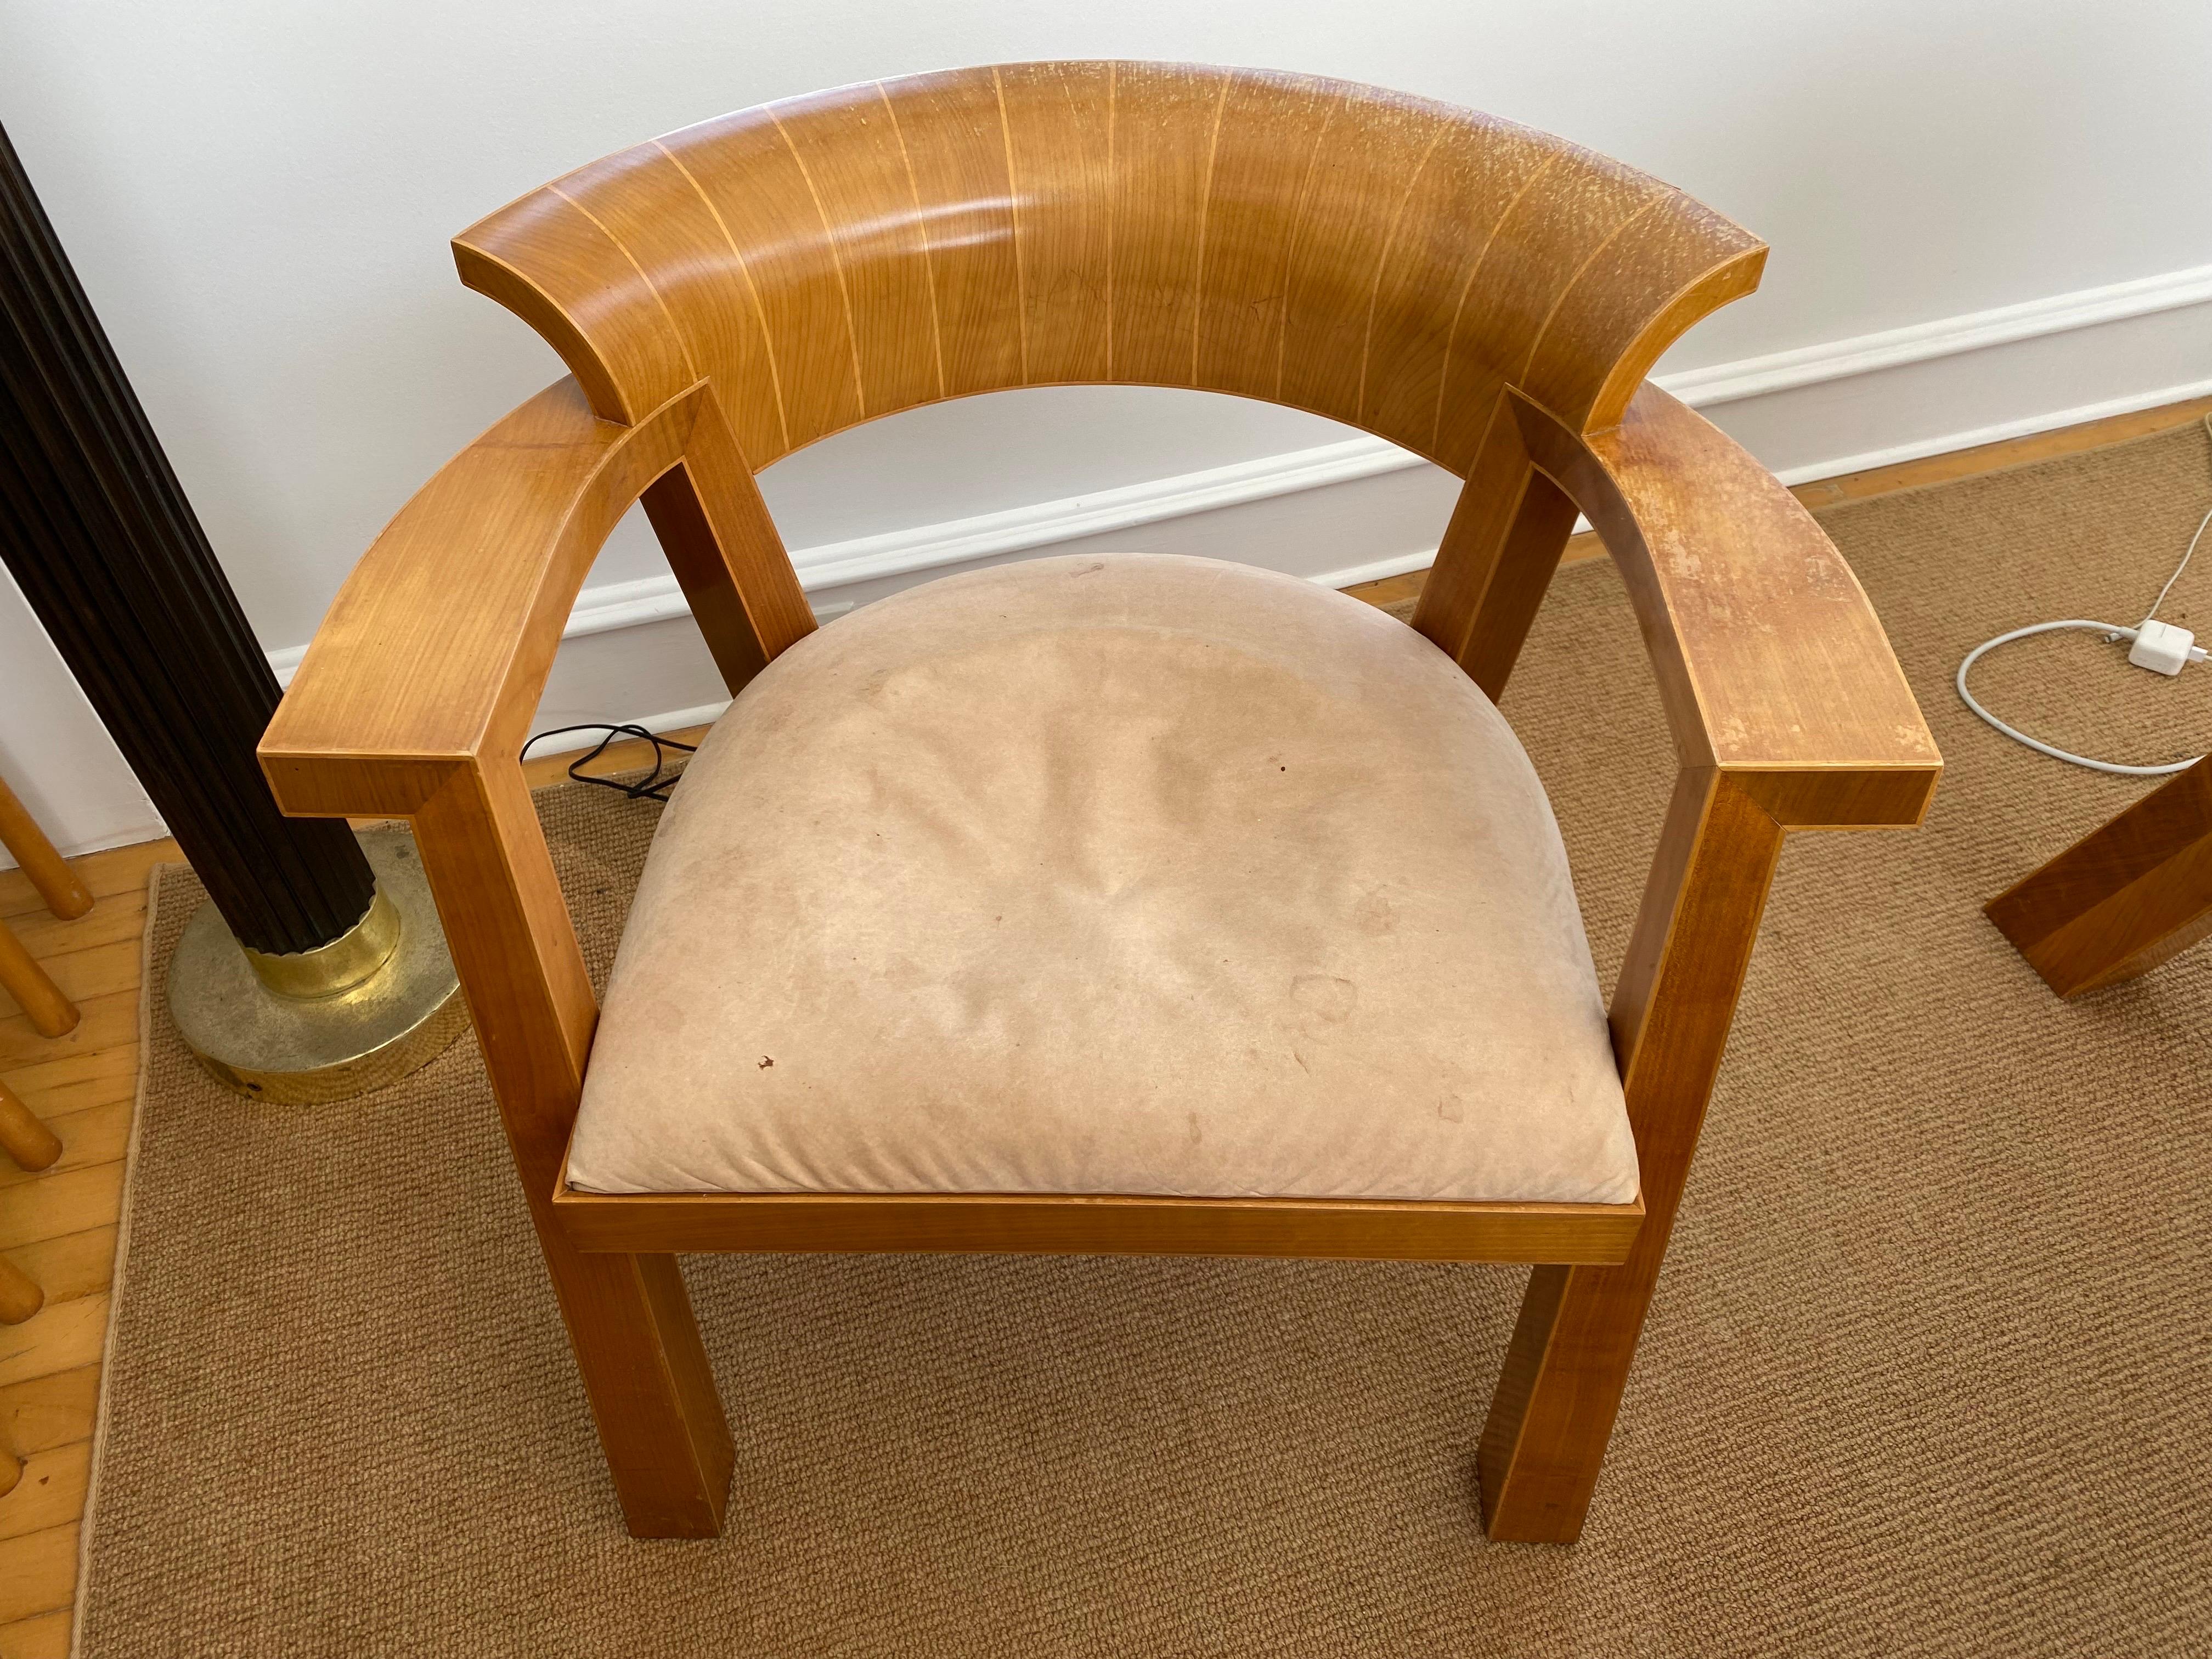 Late 20th Century Art Deco Style Desk & Chair in Maple by Rupert Williamson For Sale 1